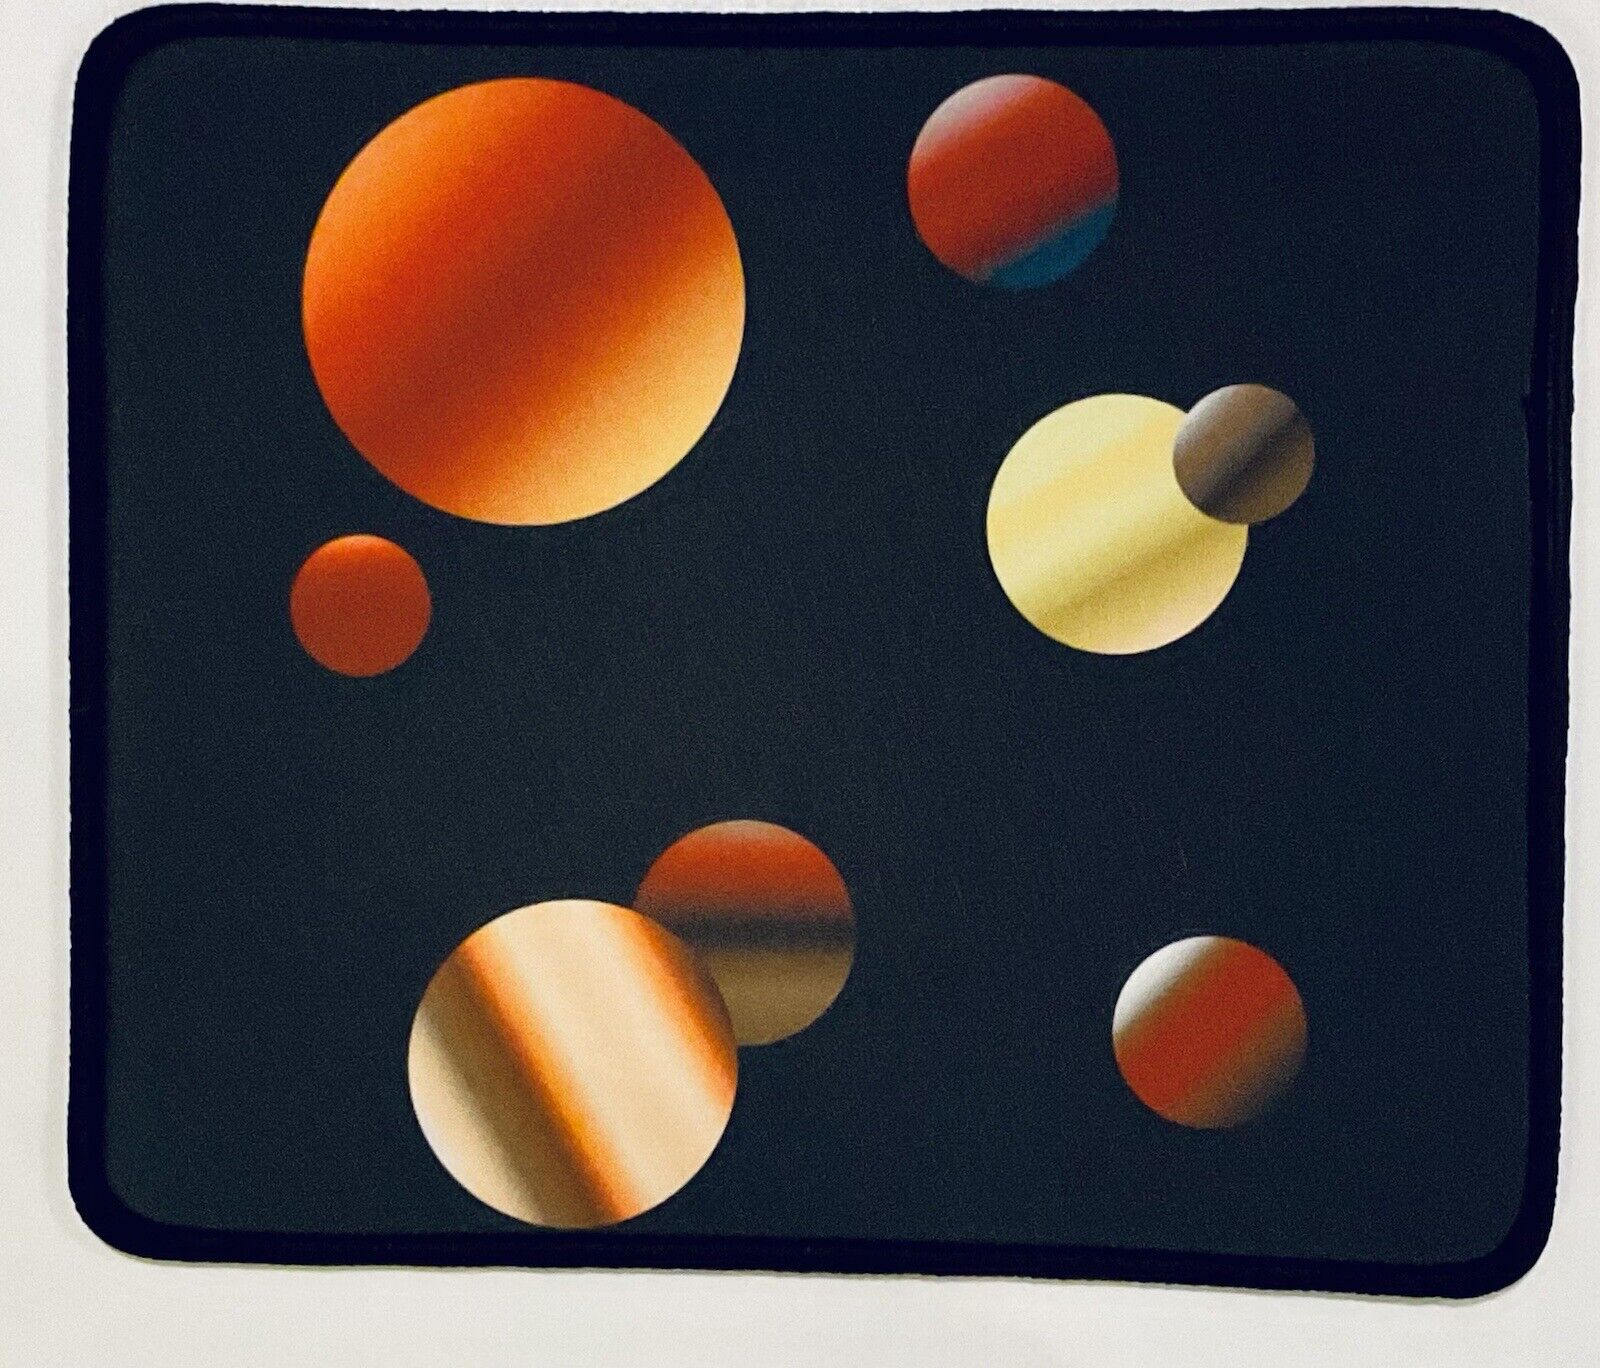 Graphic Orb Mouse Pad Rectangle Rubber Non-Slip Office or Gaming 9\